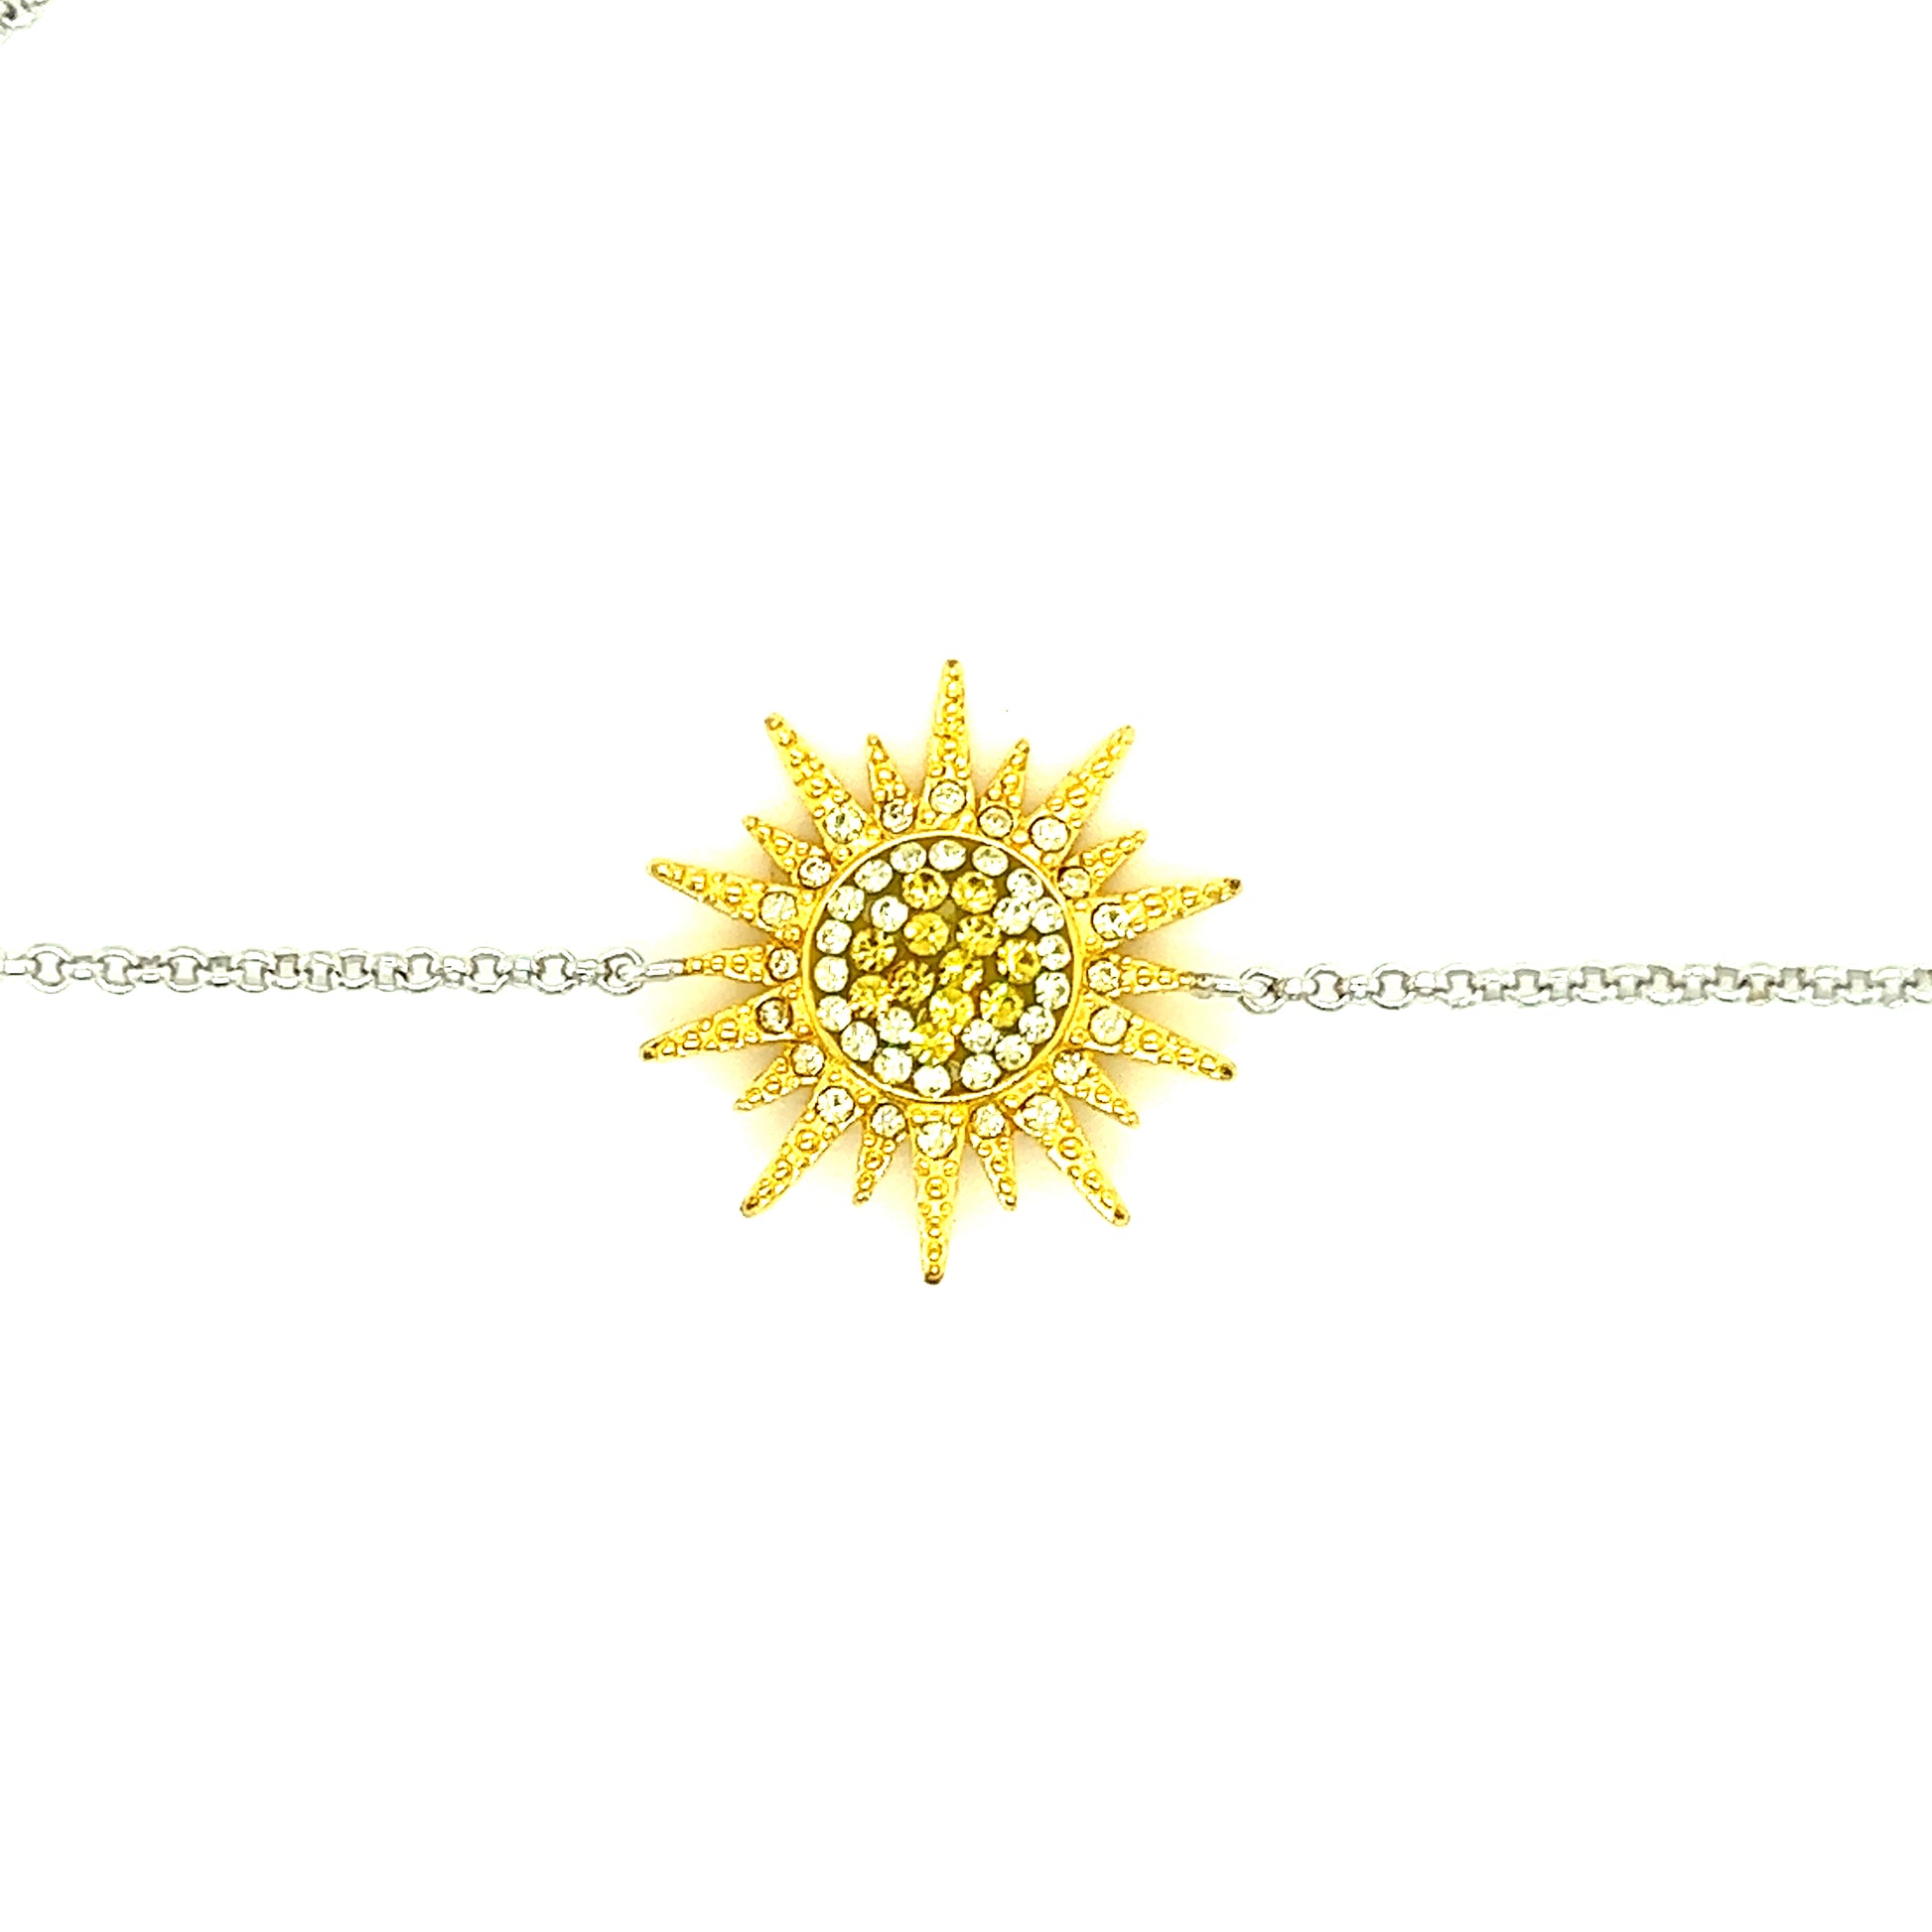 Sunburst Bracelet with Yellow and White Crystals in Sterling Silver Centerpiece Front View